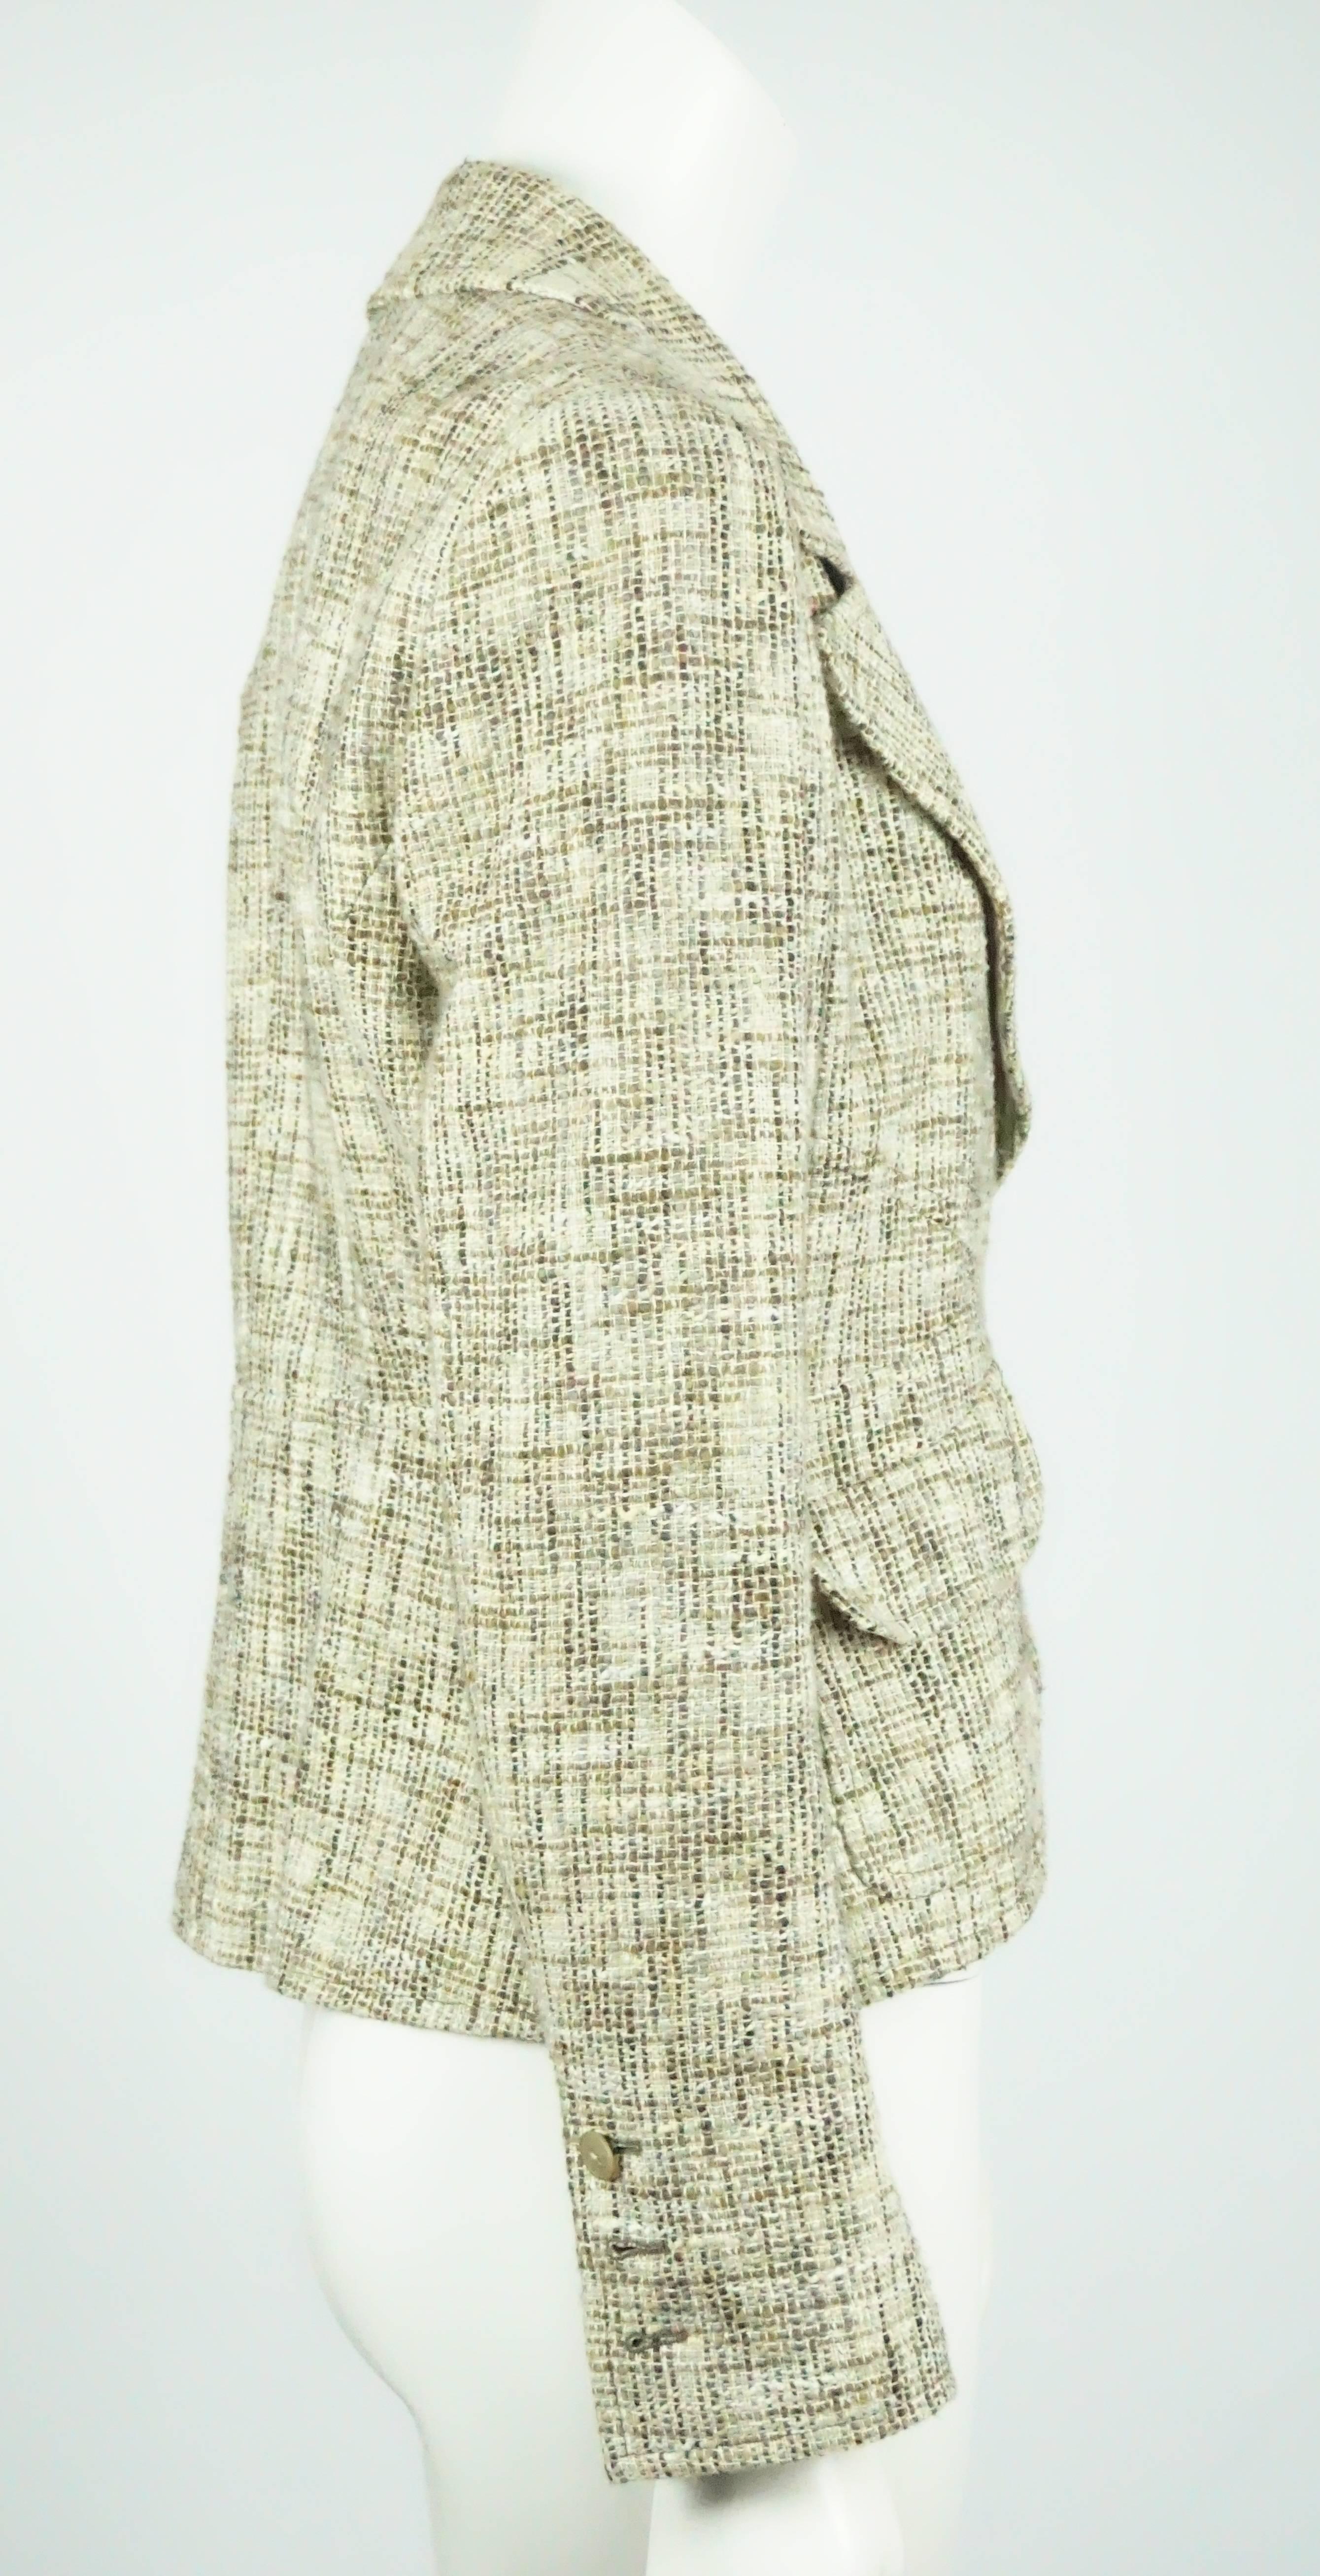 Chanel Earthtone Cotton Tweed Jacket - 42 - 03P   This very classic Chanel jacket is made of multi earthtone cotton tweed fabric, it is single breasted with one front button, 2 front pockets, 3 buttons on each sleeve, silk lined and a semi/slight